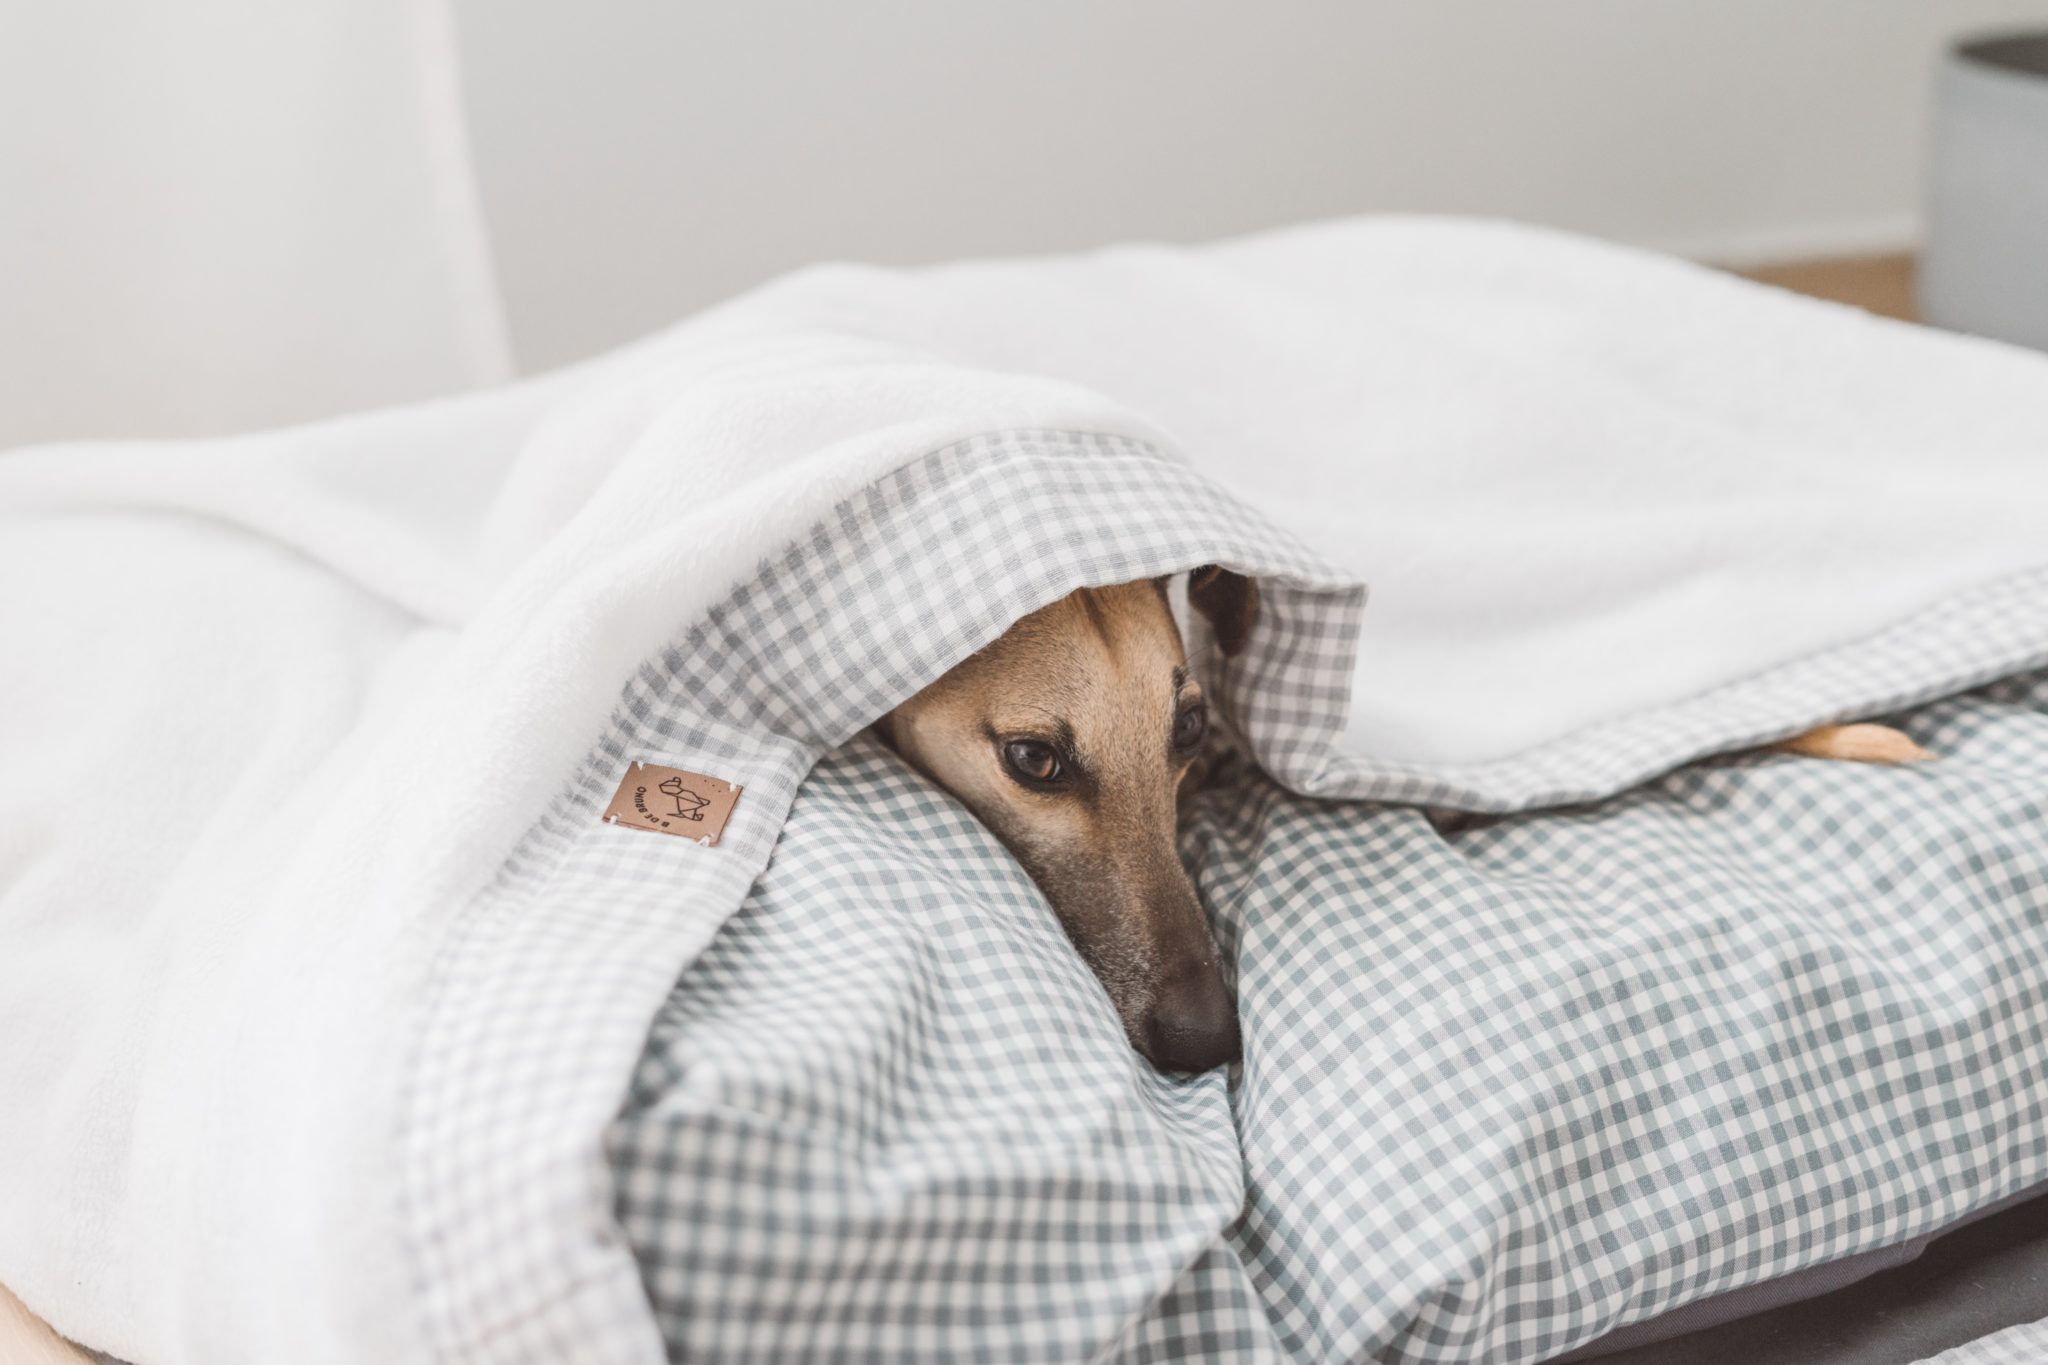 A greyhound who is frightened of fireworks hides under the covers